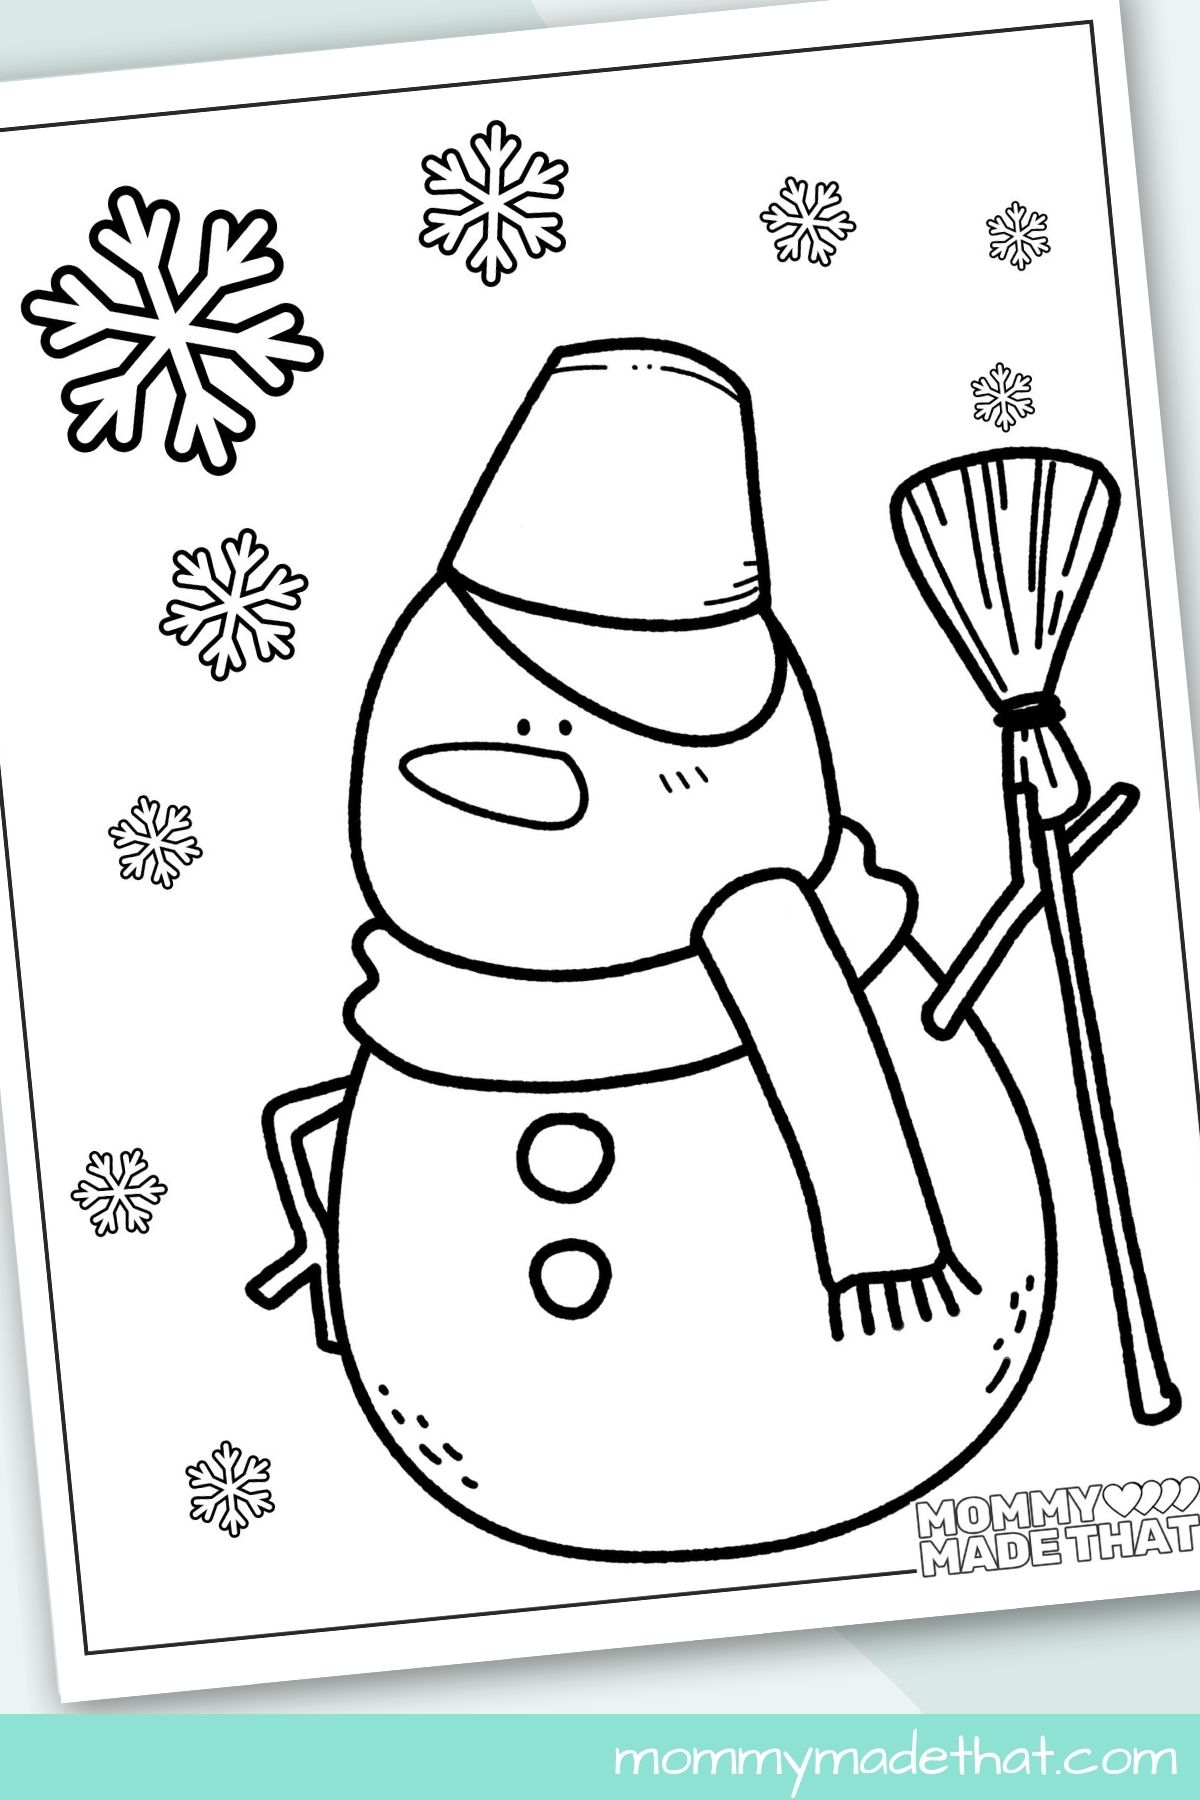 snowman coloring page